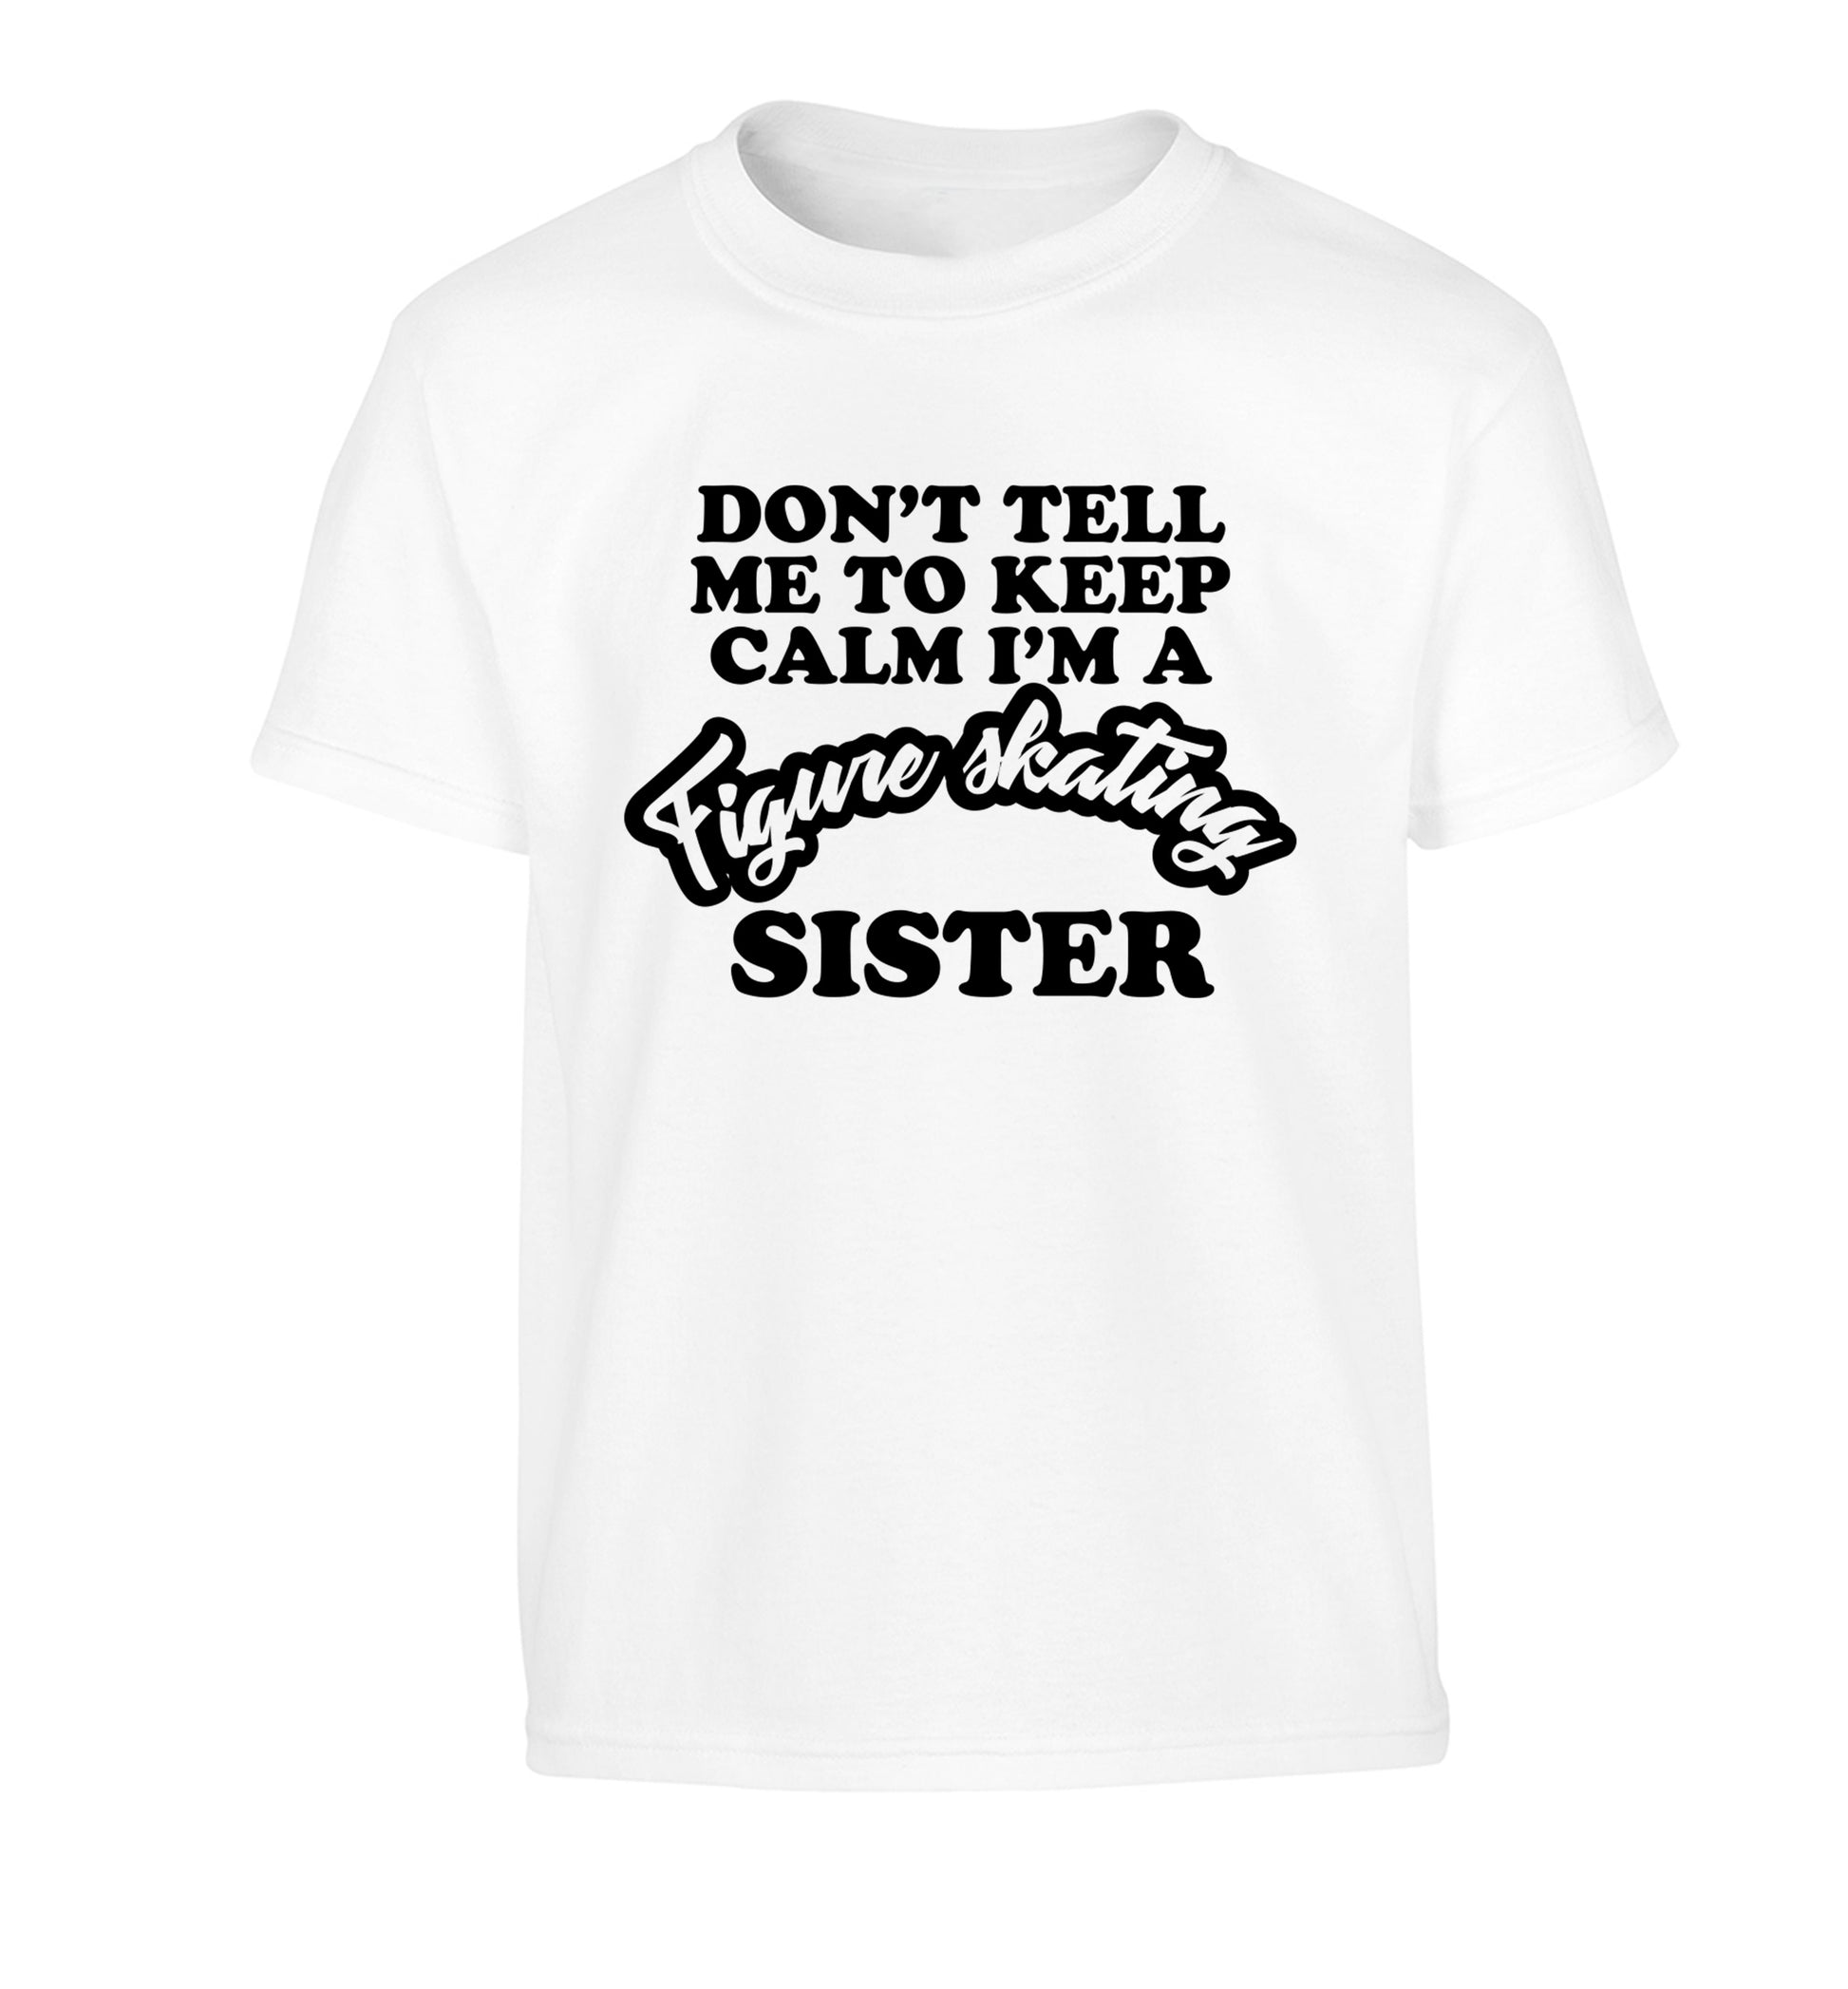 Don't tell me to keep calm I'm a figure skating sister Children's white Tshirt 12-14 Years